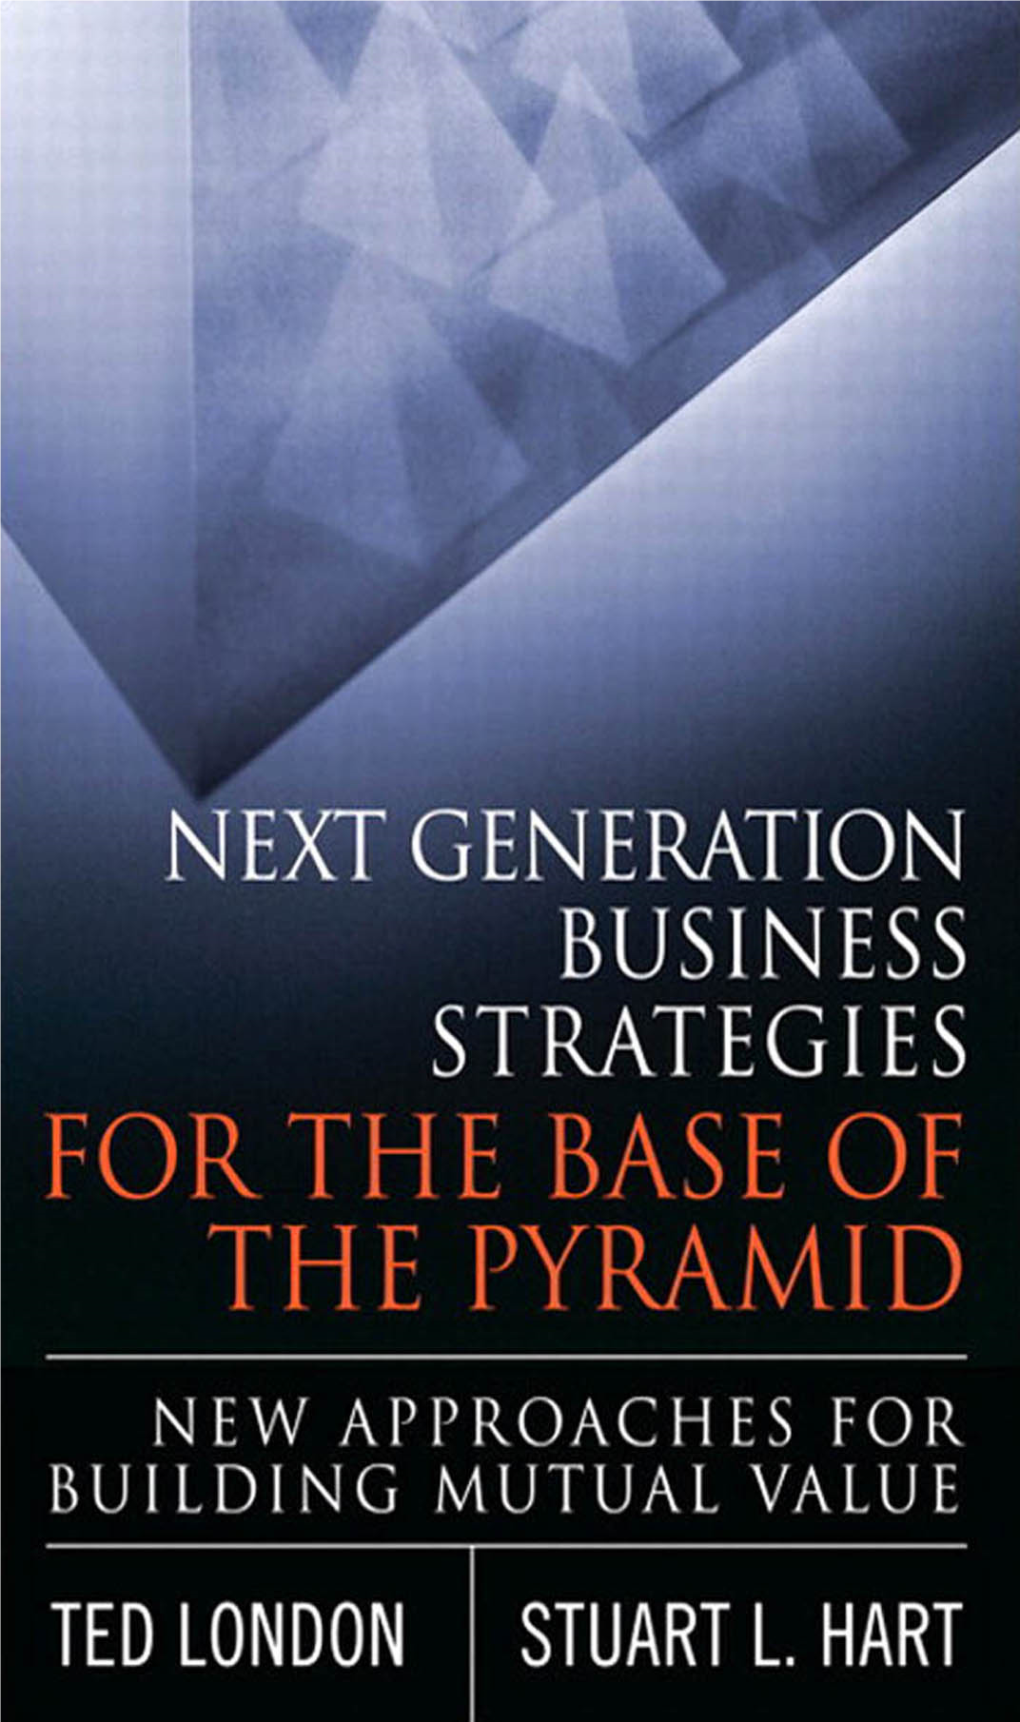 Next Generation Business Strategies for the Base of the Pyramid